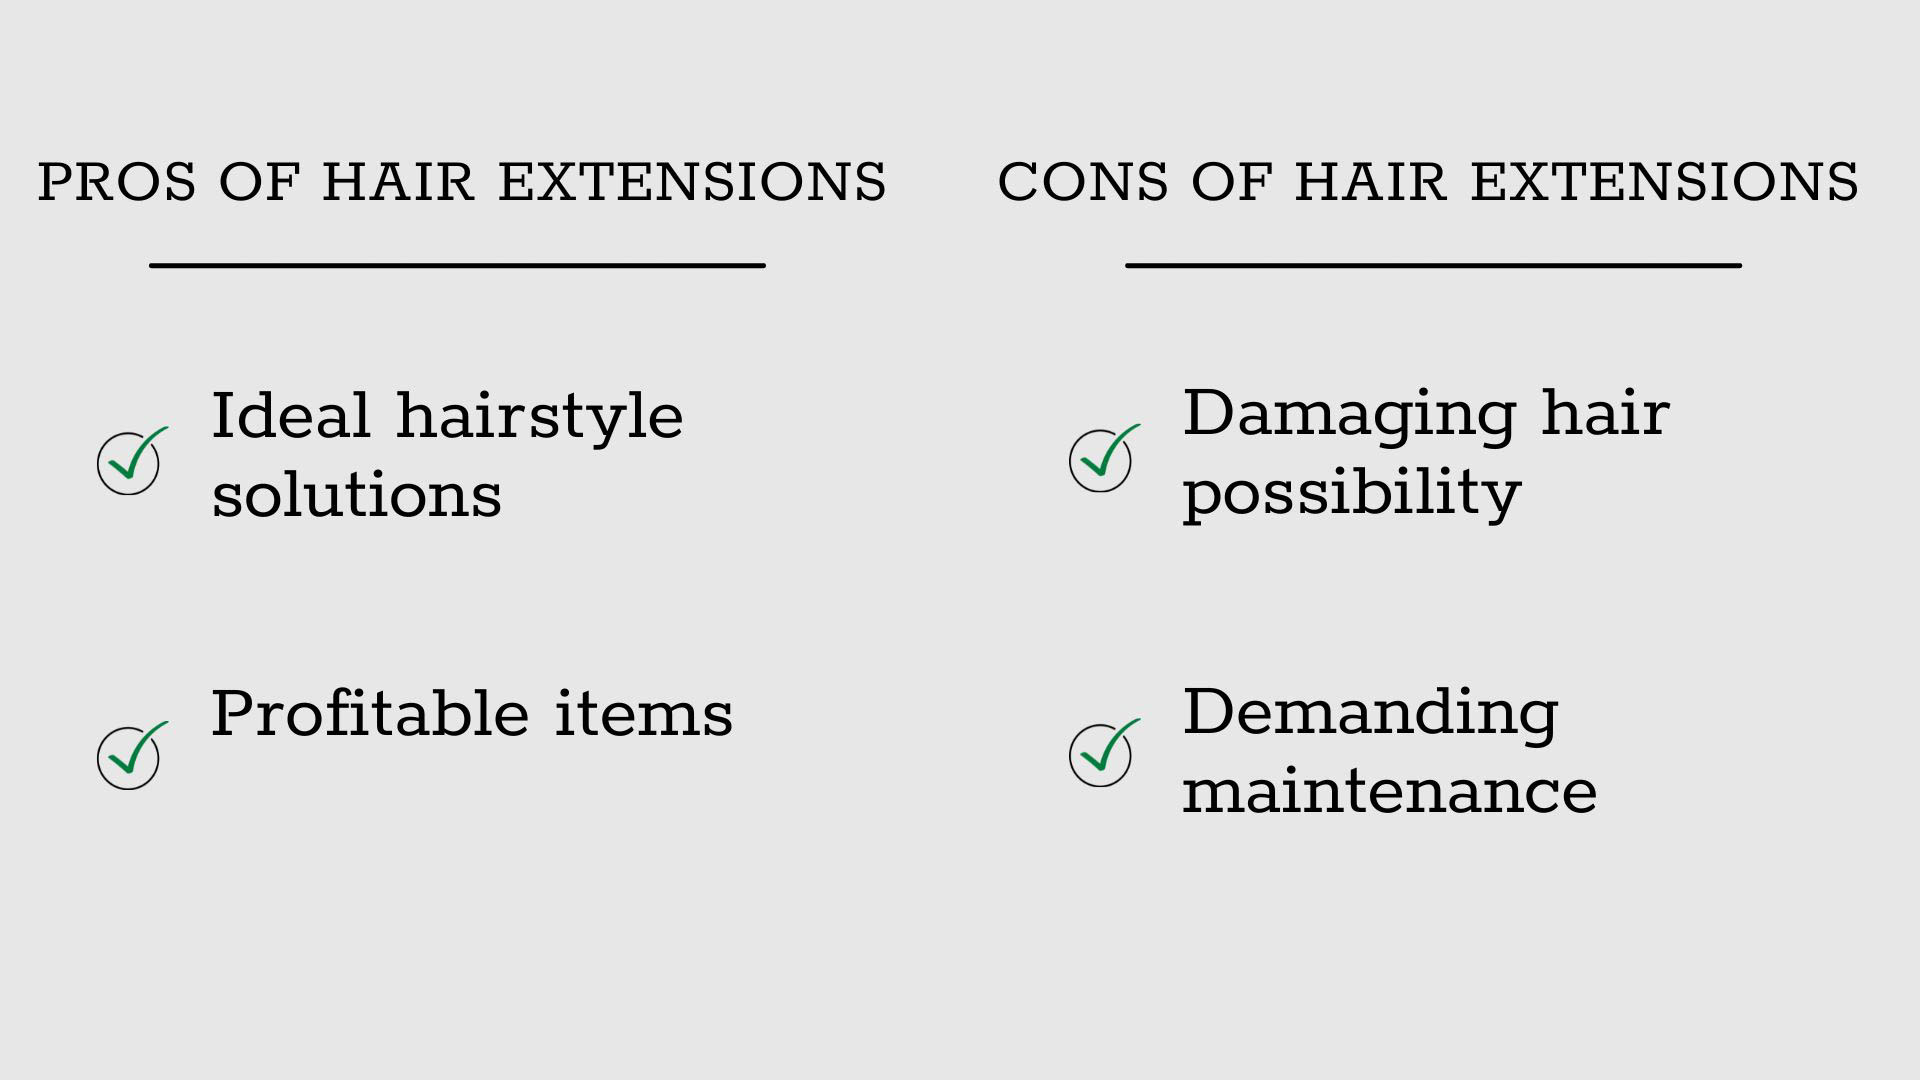 Learn the pros and cons of wholesale hair extensions